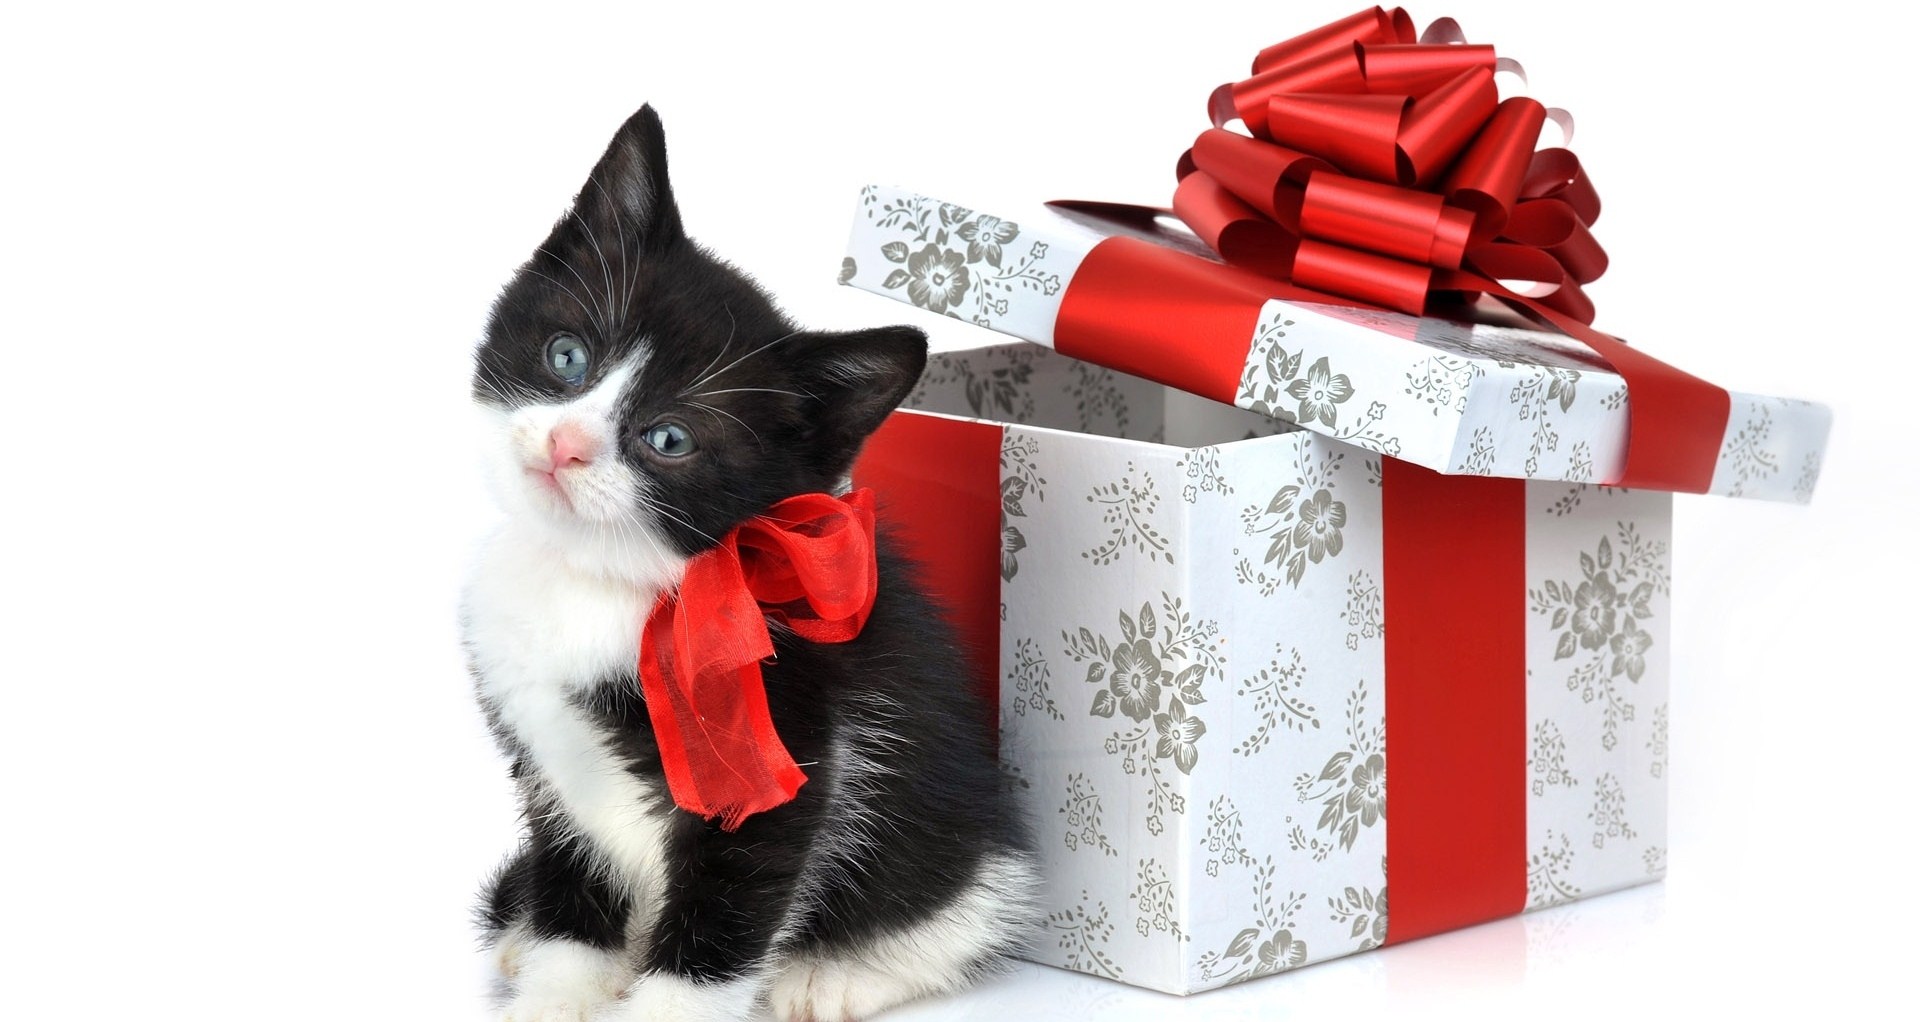 christmas cat gift pictures Christmas cat wallpaper 2015 Christmas